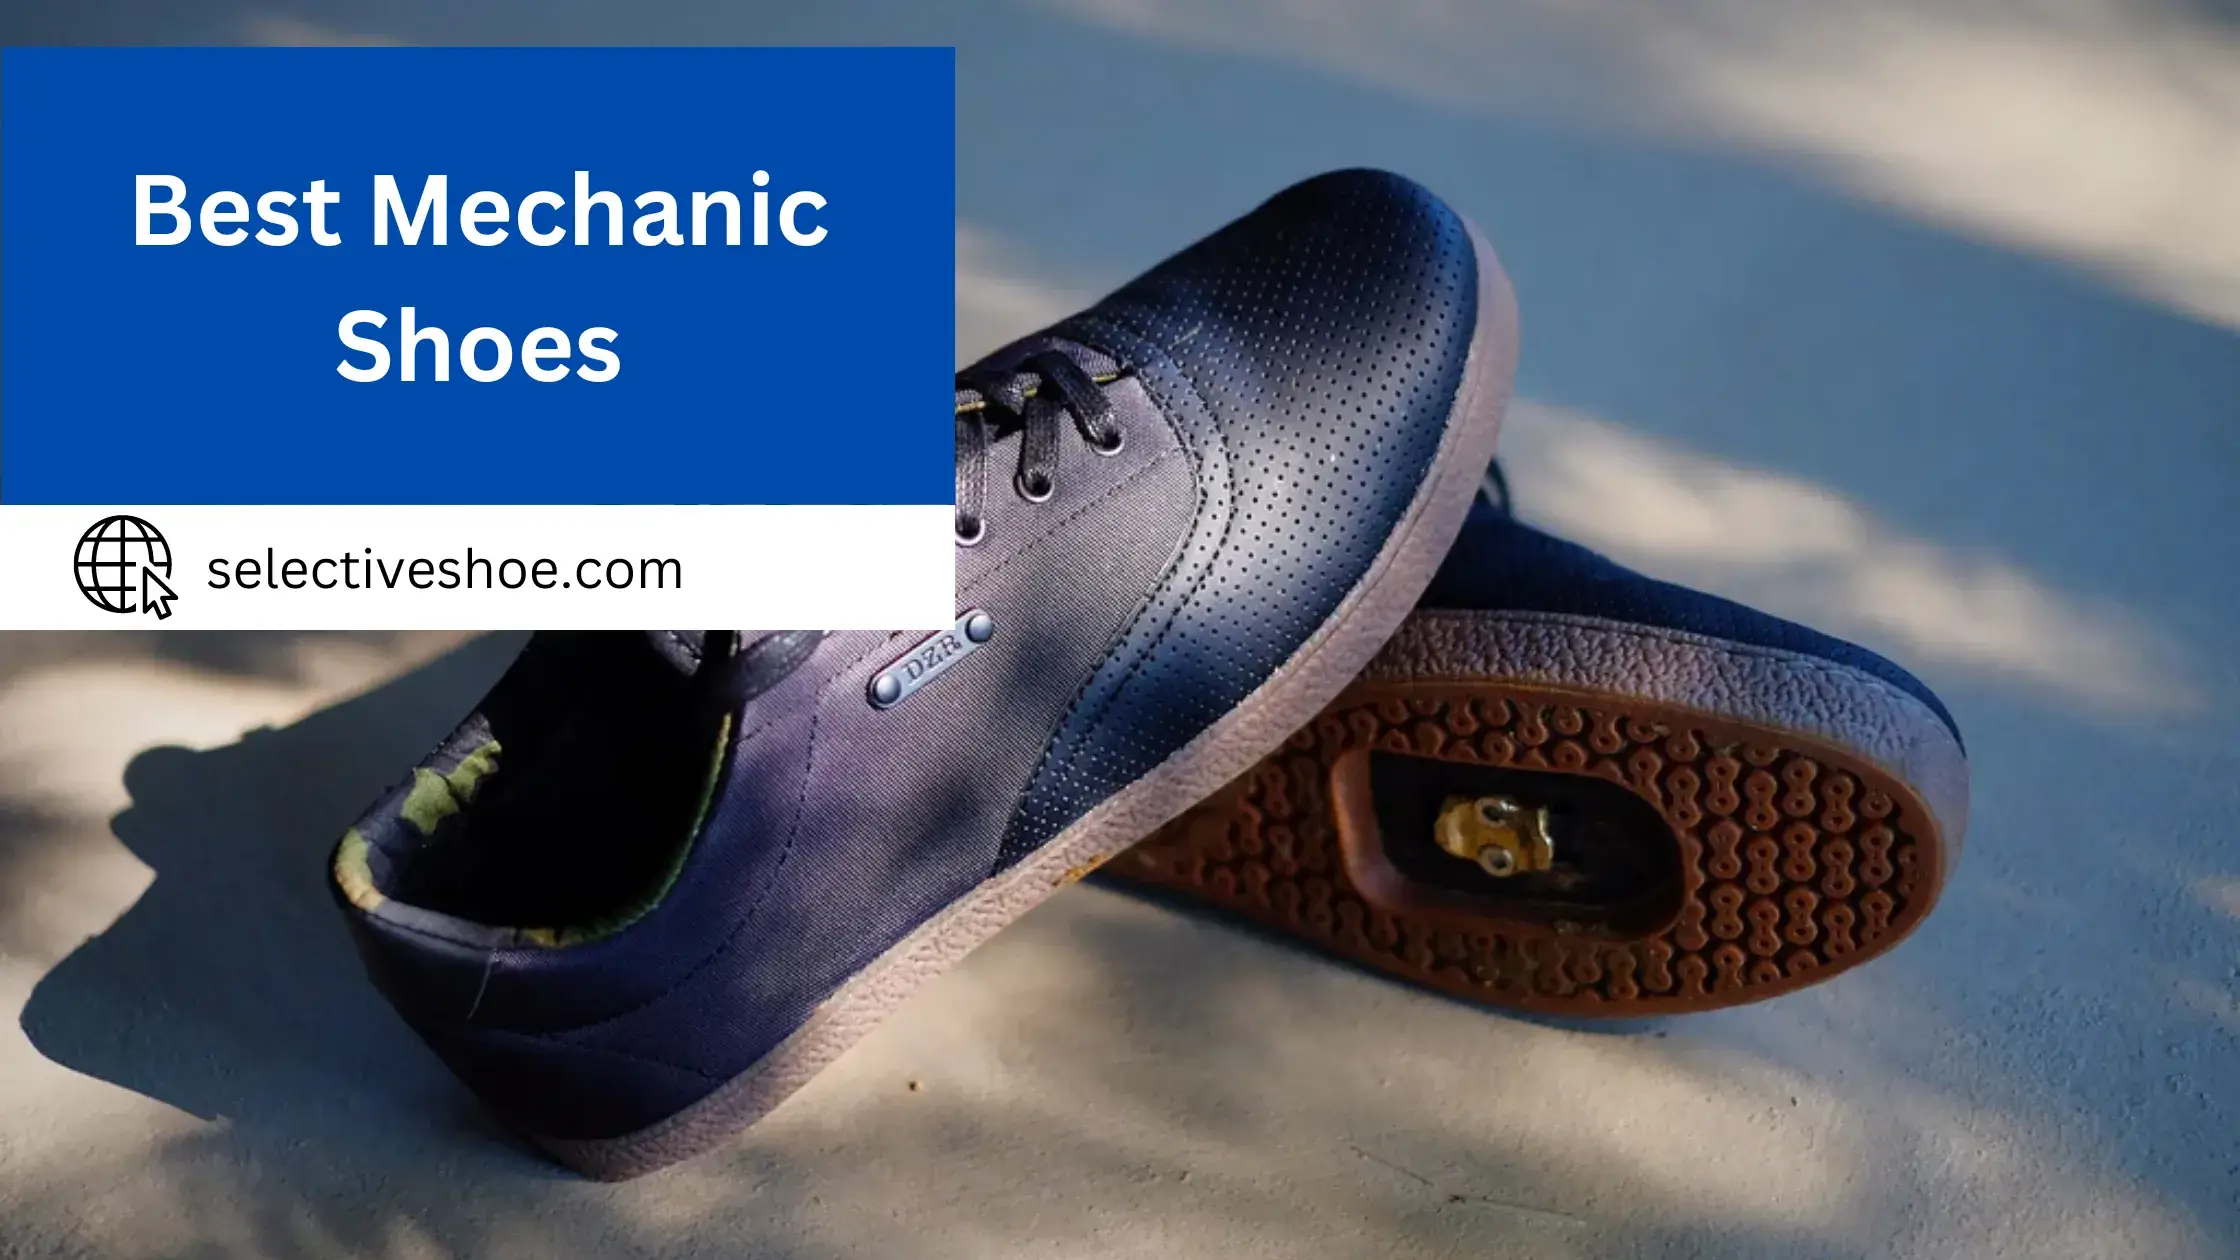 Best Mechanic Shoes - A Comprehensive Guide